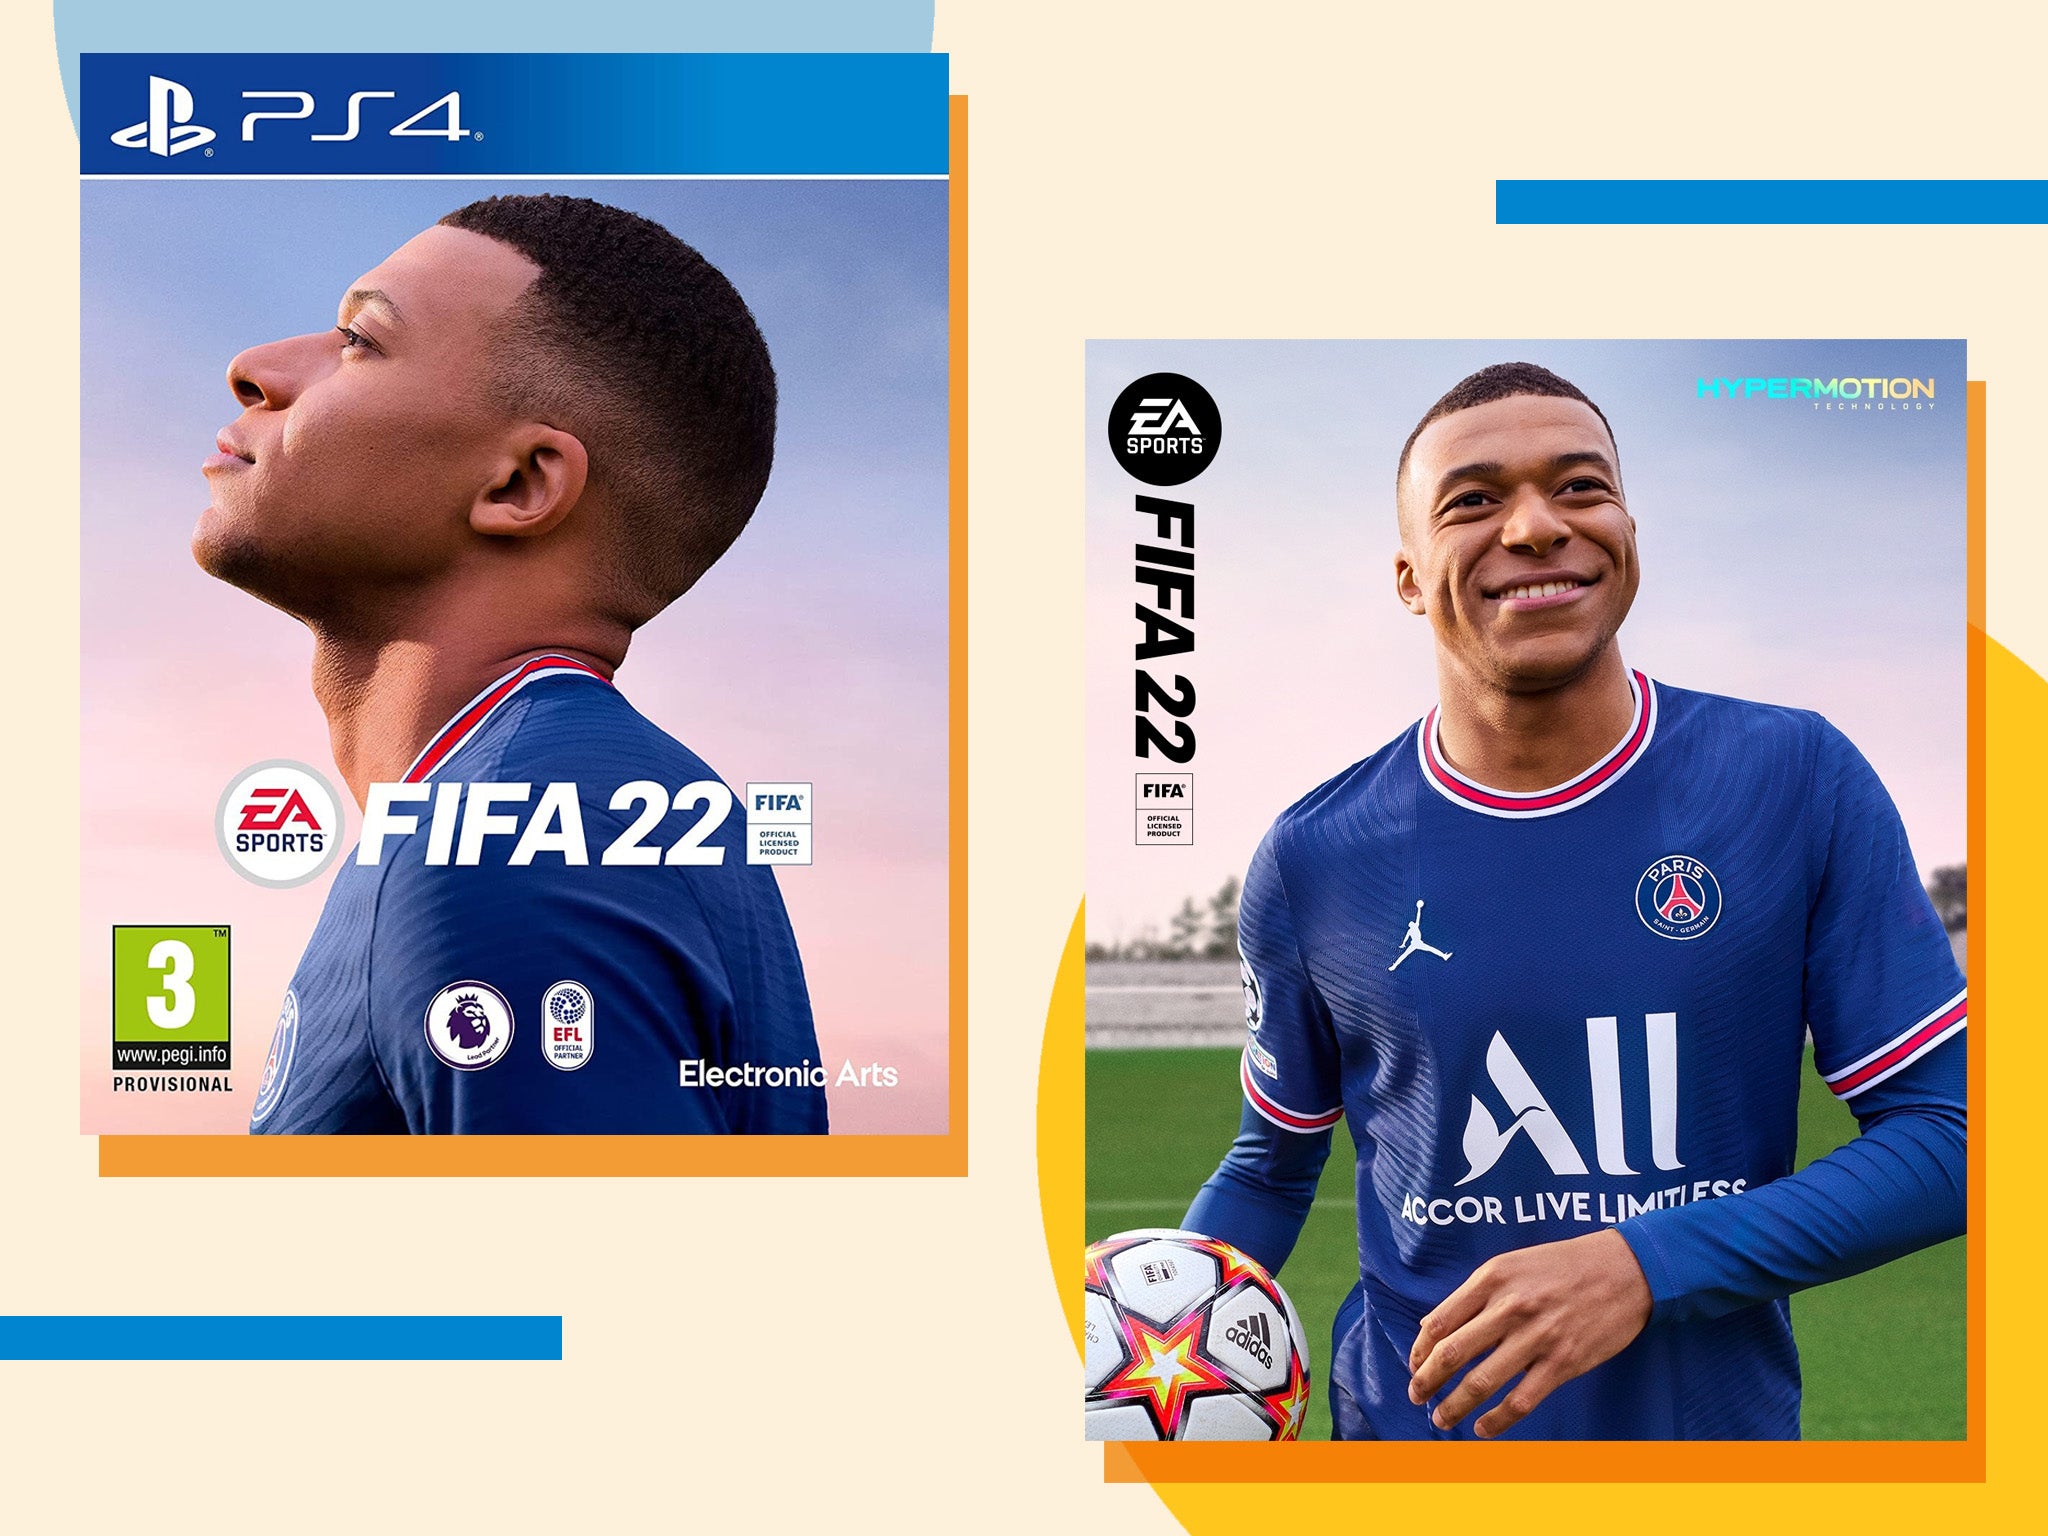 FIFA 22 Web App and Companion App expected release date, features